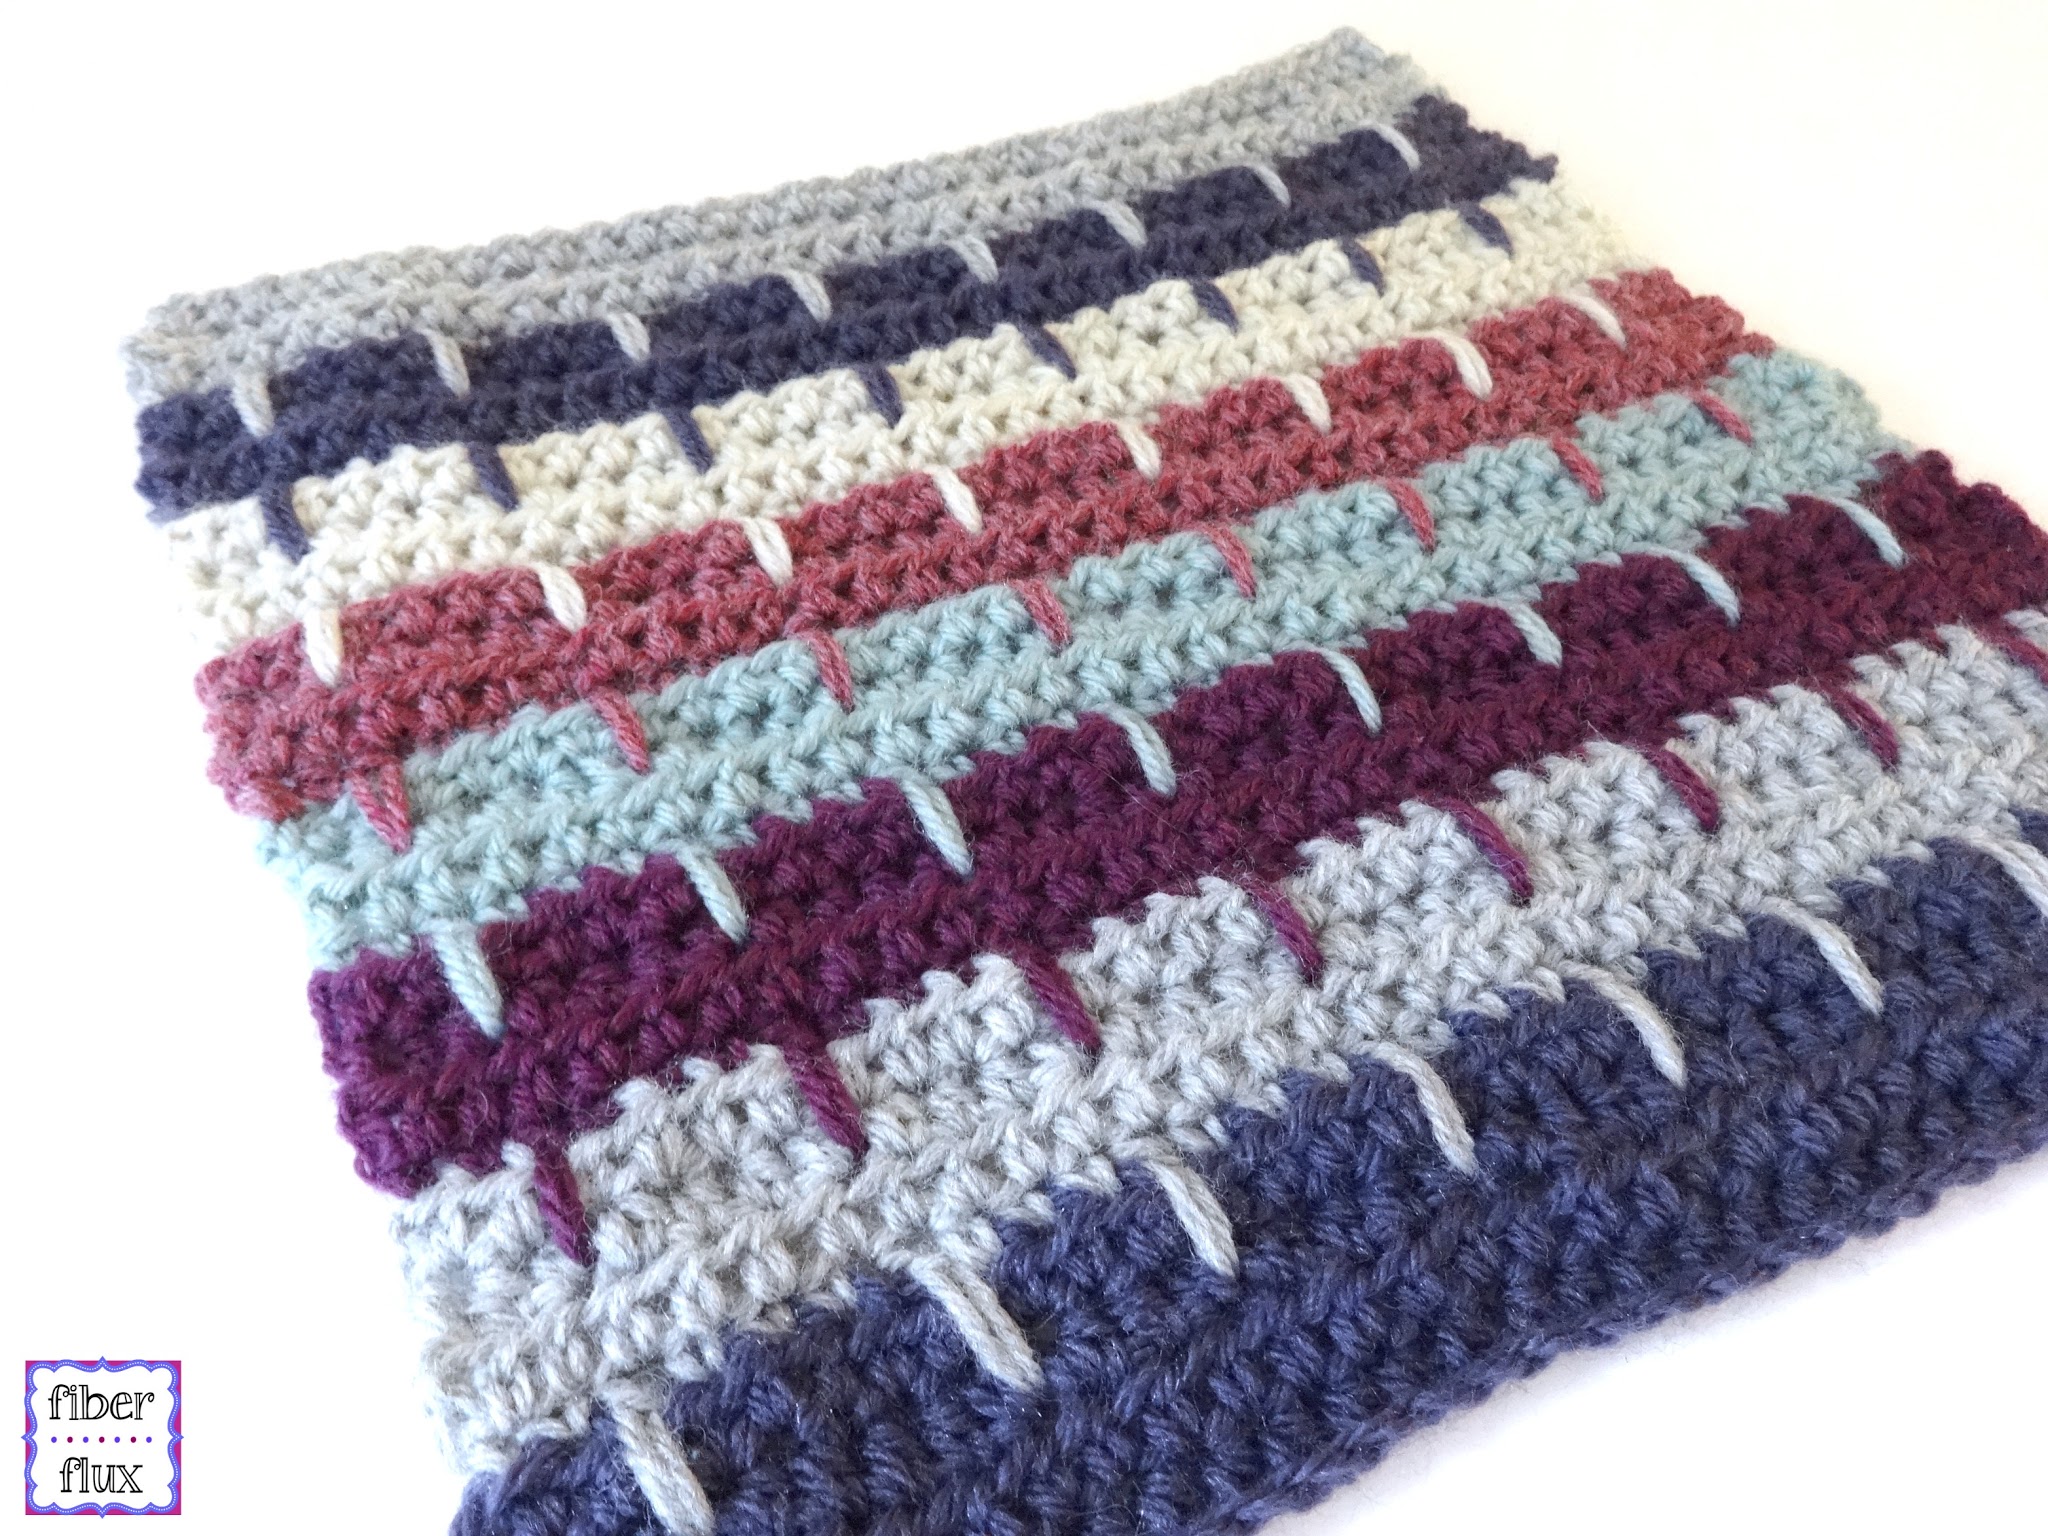 Spiked Stripes Crochet Square